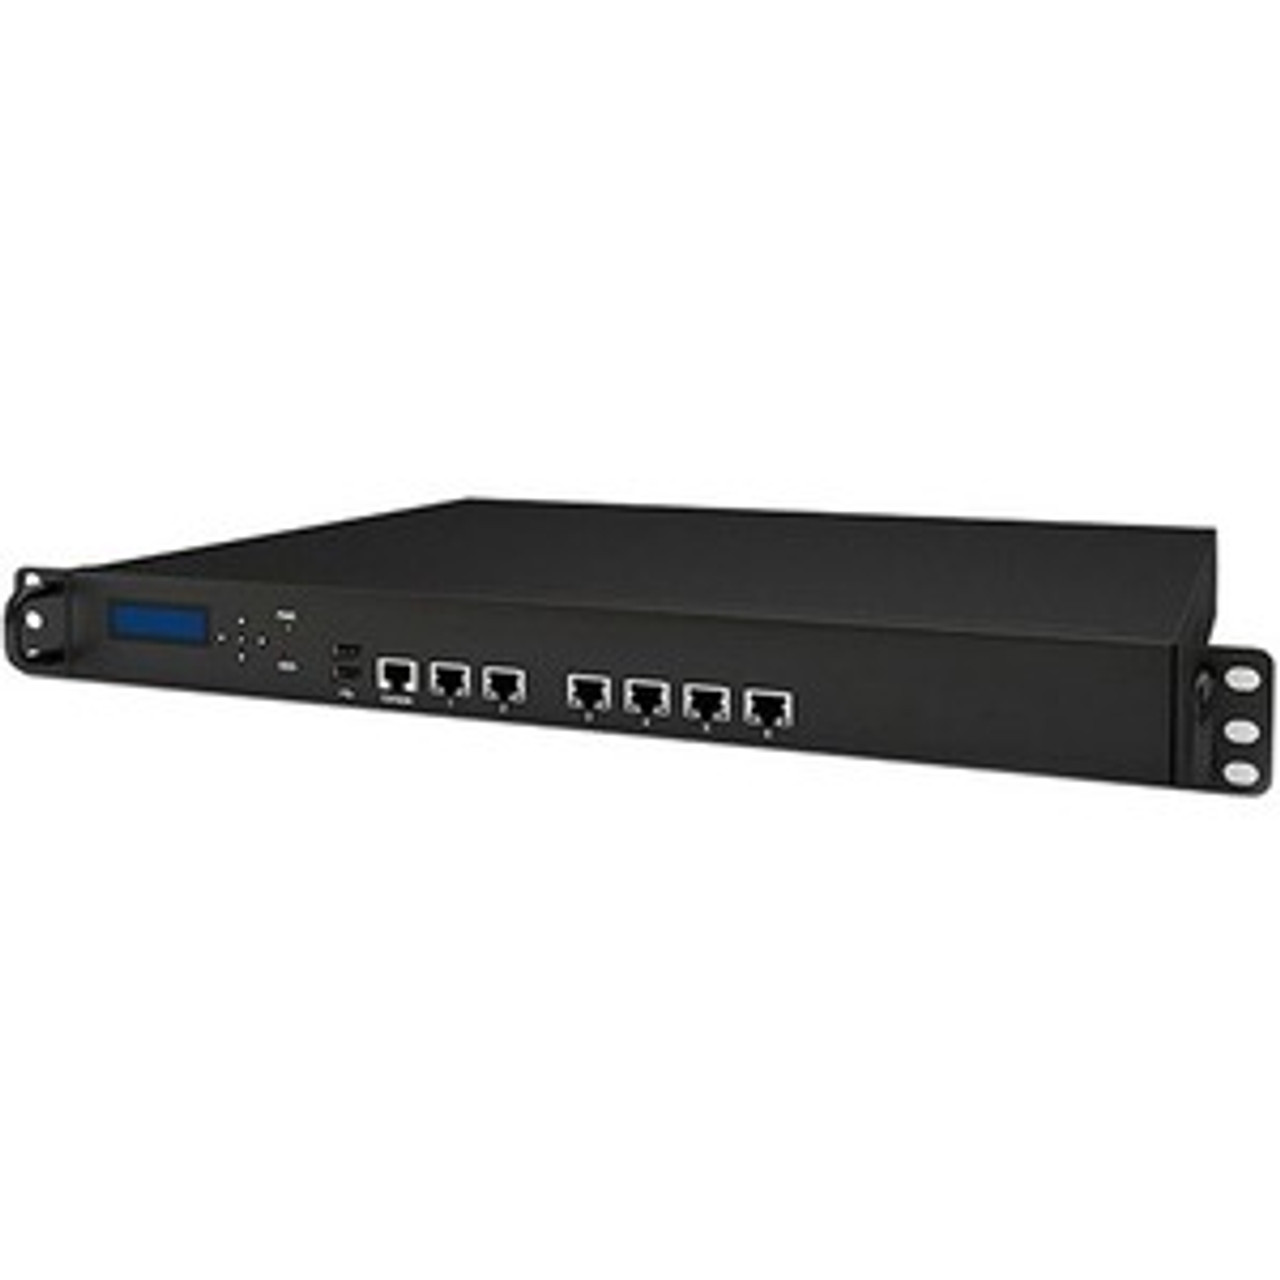 Extreme Networks NX-5500-100R0-WR